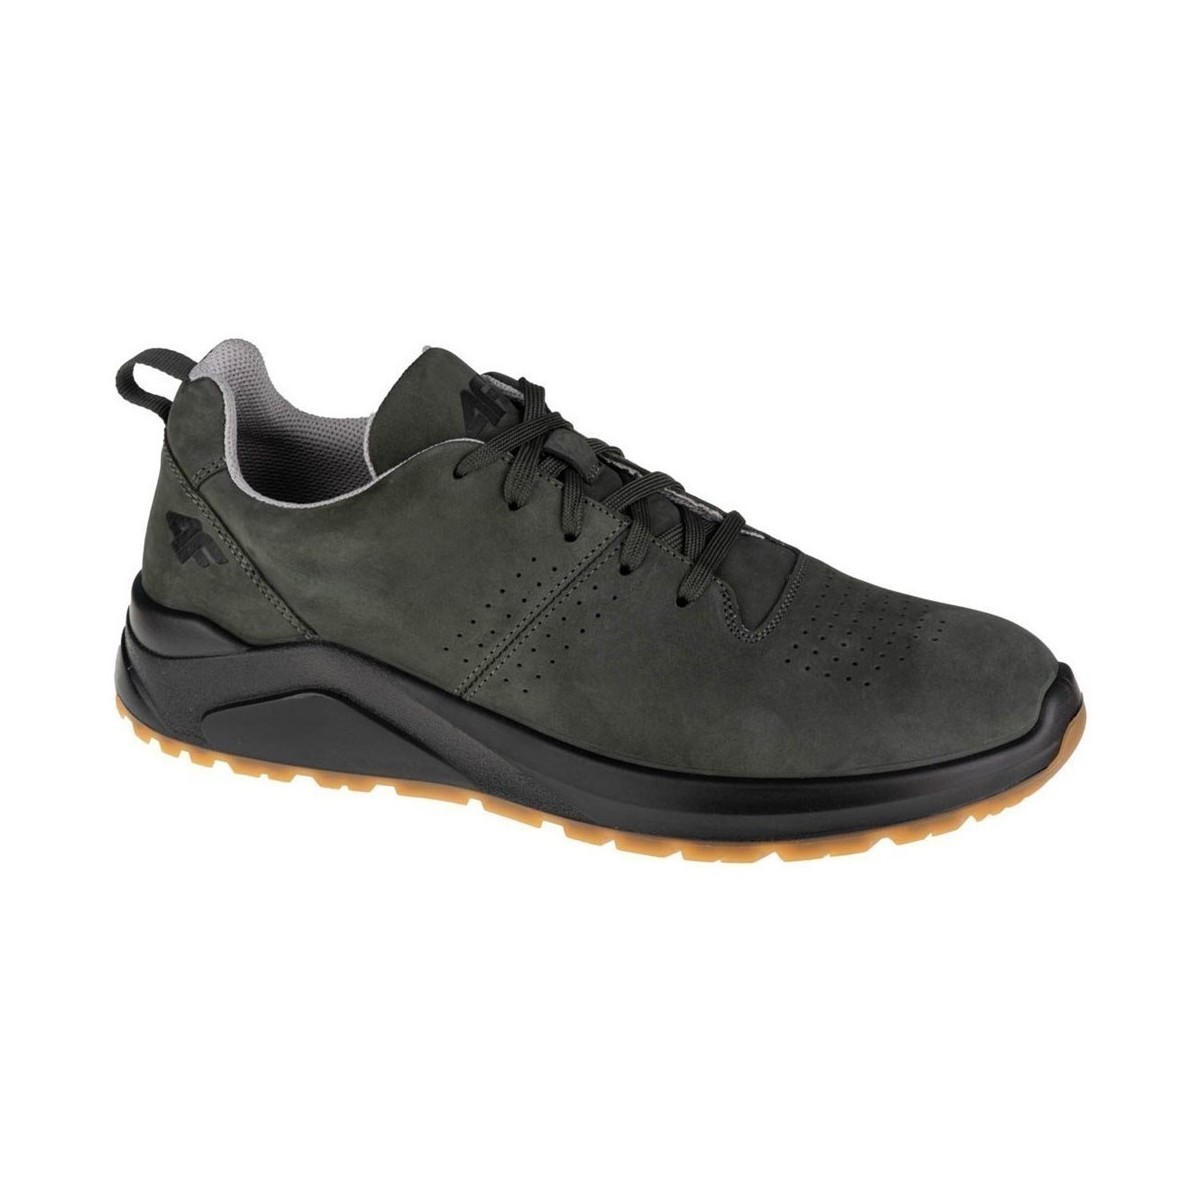 Chaussures Homme Baskets basses 4F OBML251 Olive